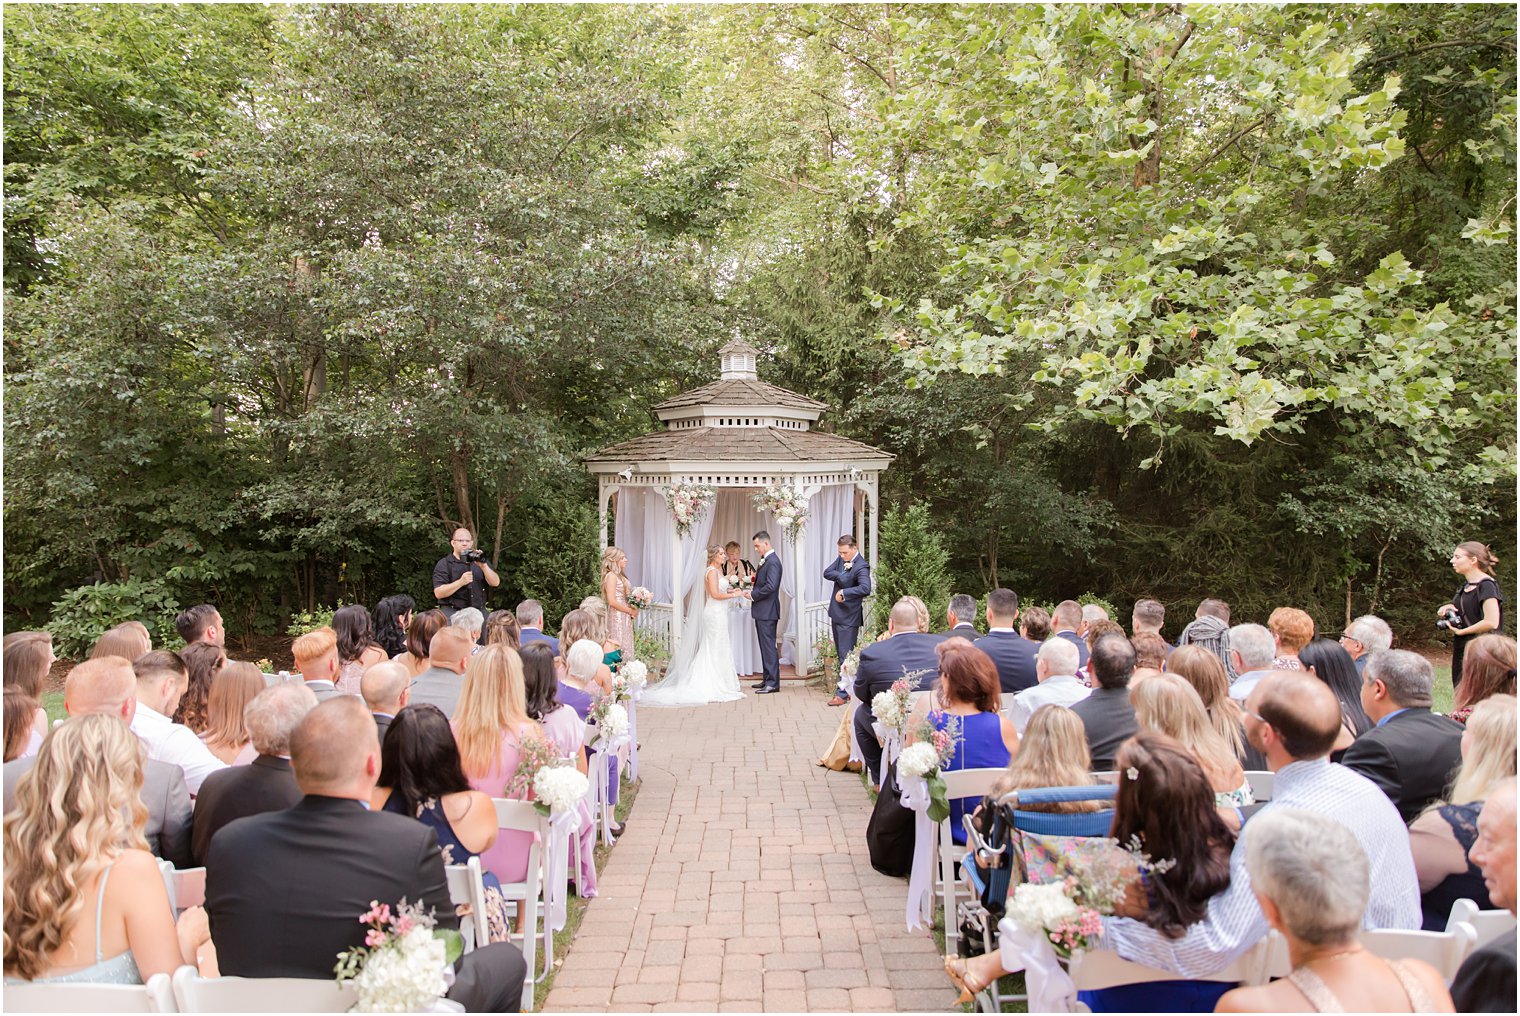 Outdoor ceremony at the Grain House at the Olde Mill Inn in Basking Ridge, NJ